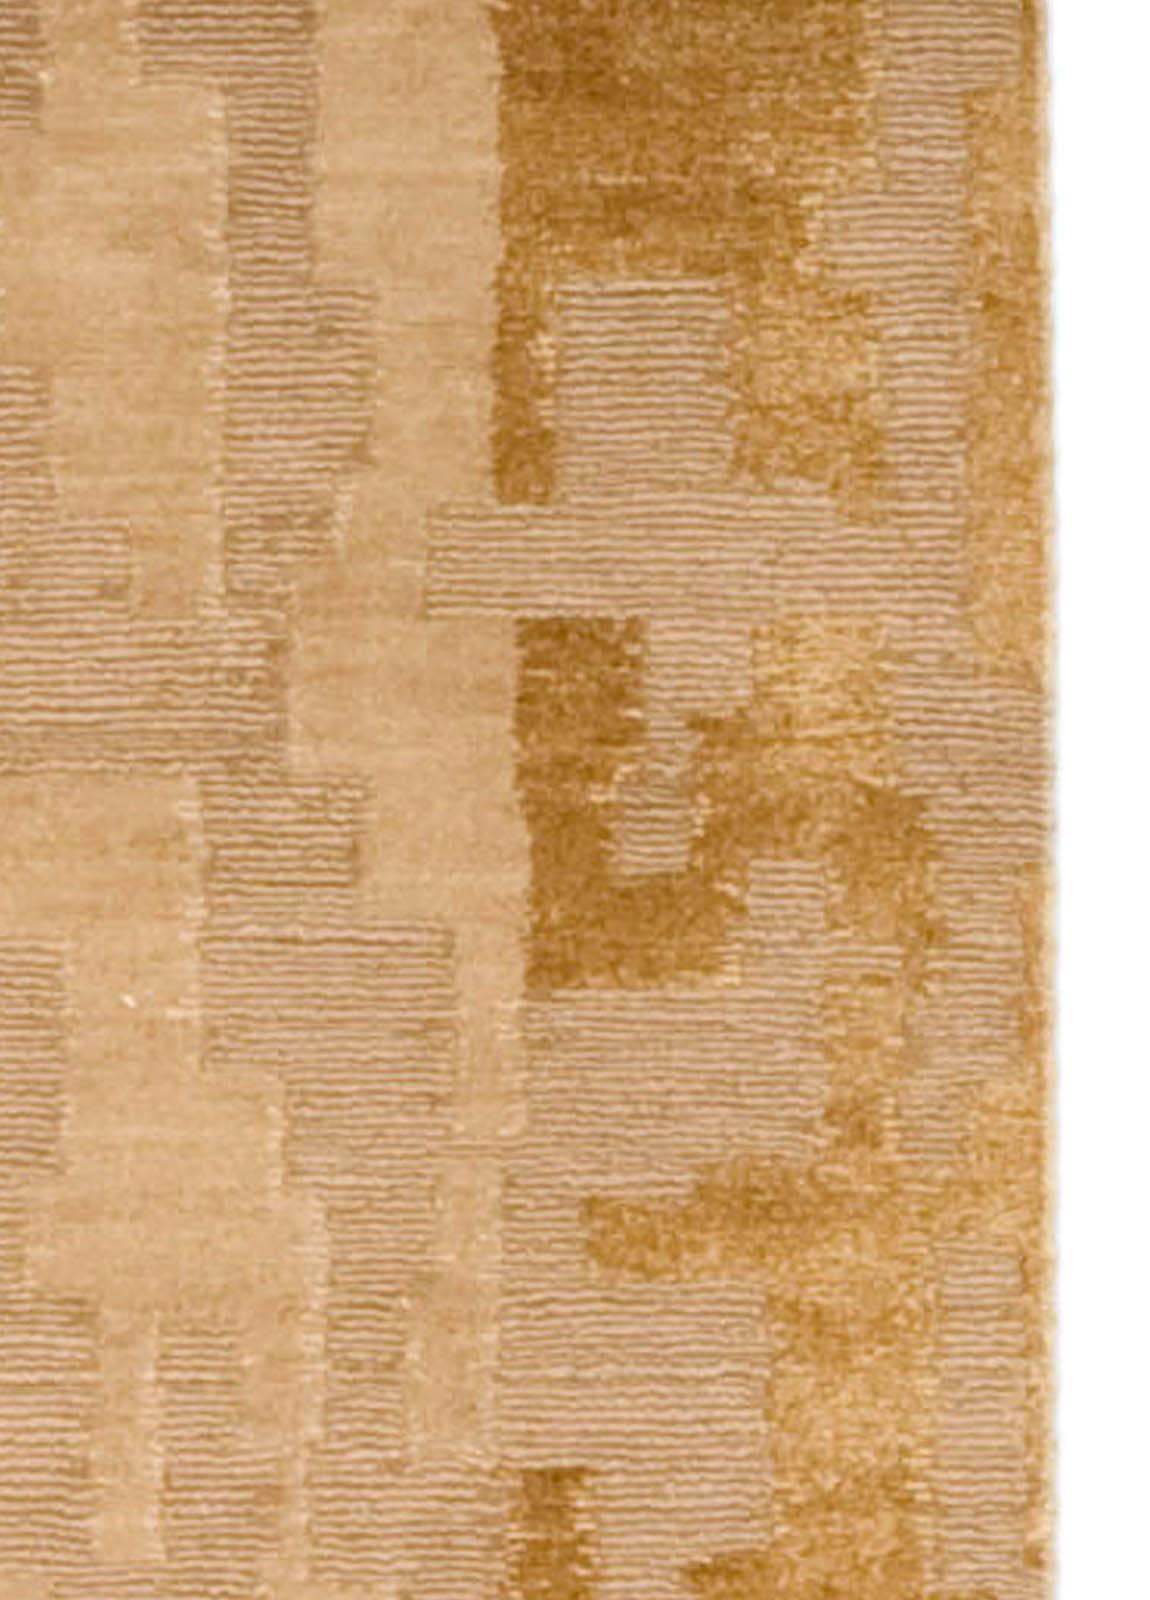 Hand-Knotted Doris Leslie Blau Collection 'AD4' Golden Beige and Brown Rug by Arthur Dunnam For Sale